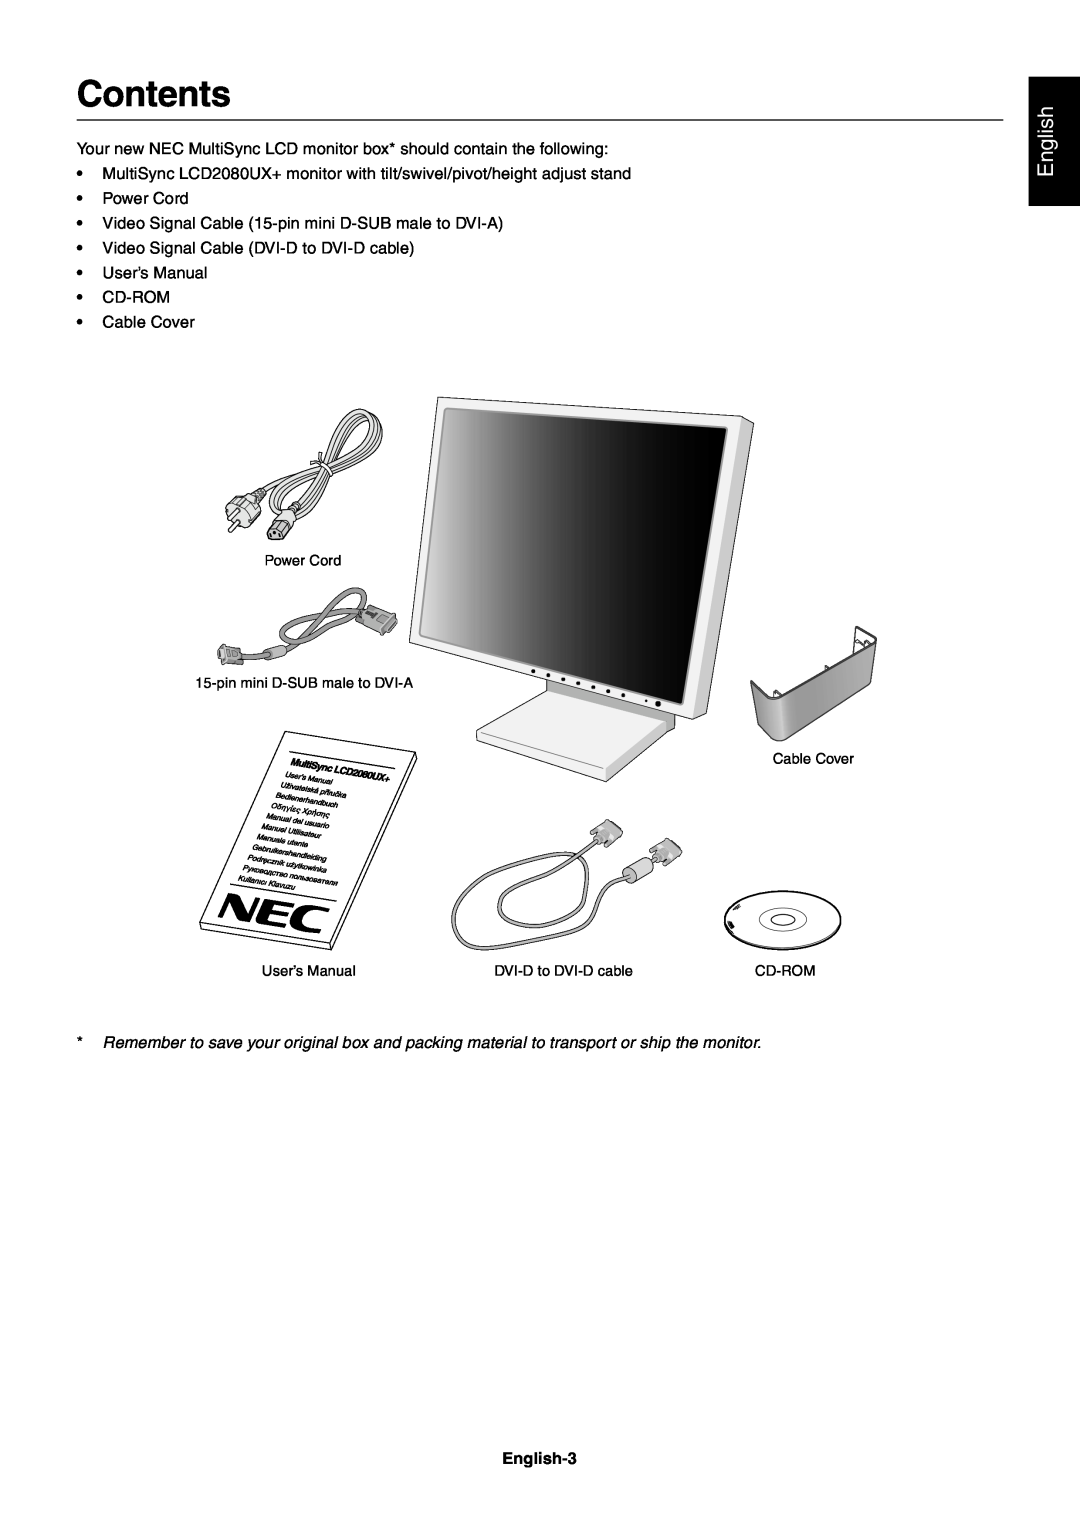 NEC LCD2080UX+ user manual Contents, English-3 